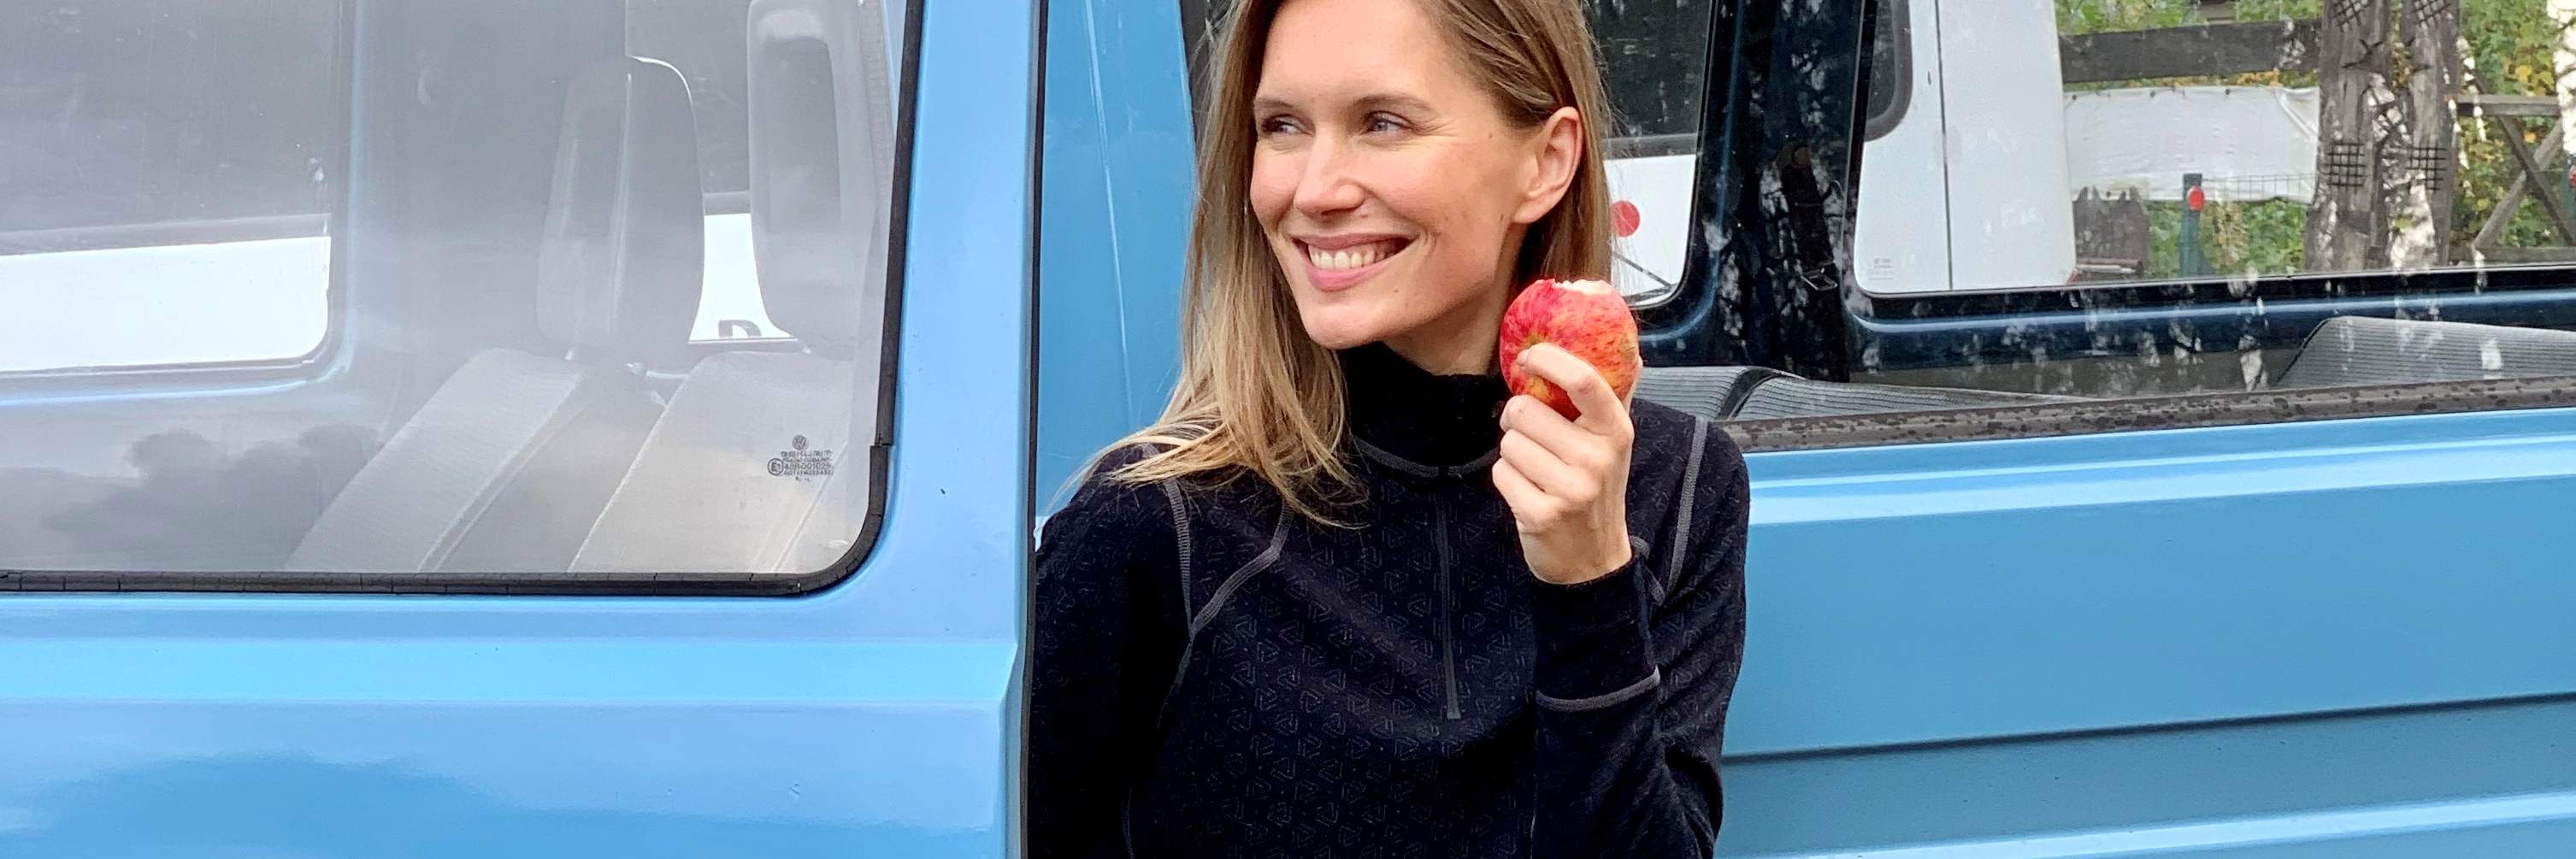 A woman is standing next to an old car and eating an apple